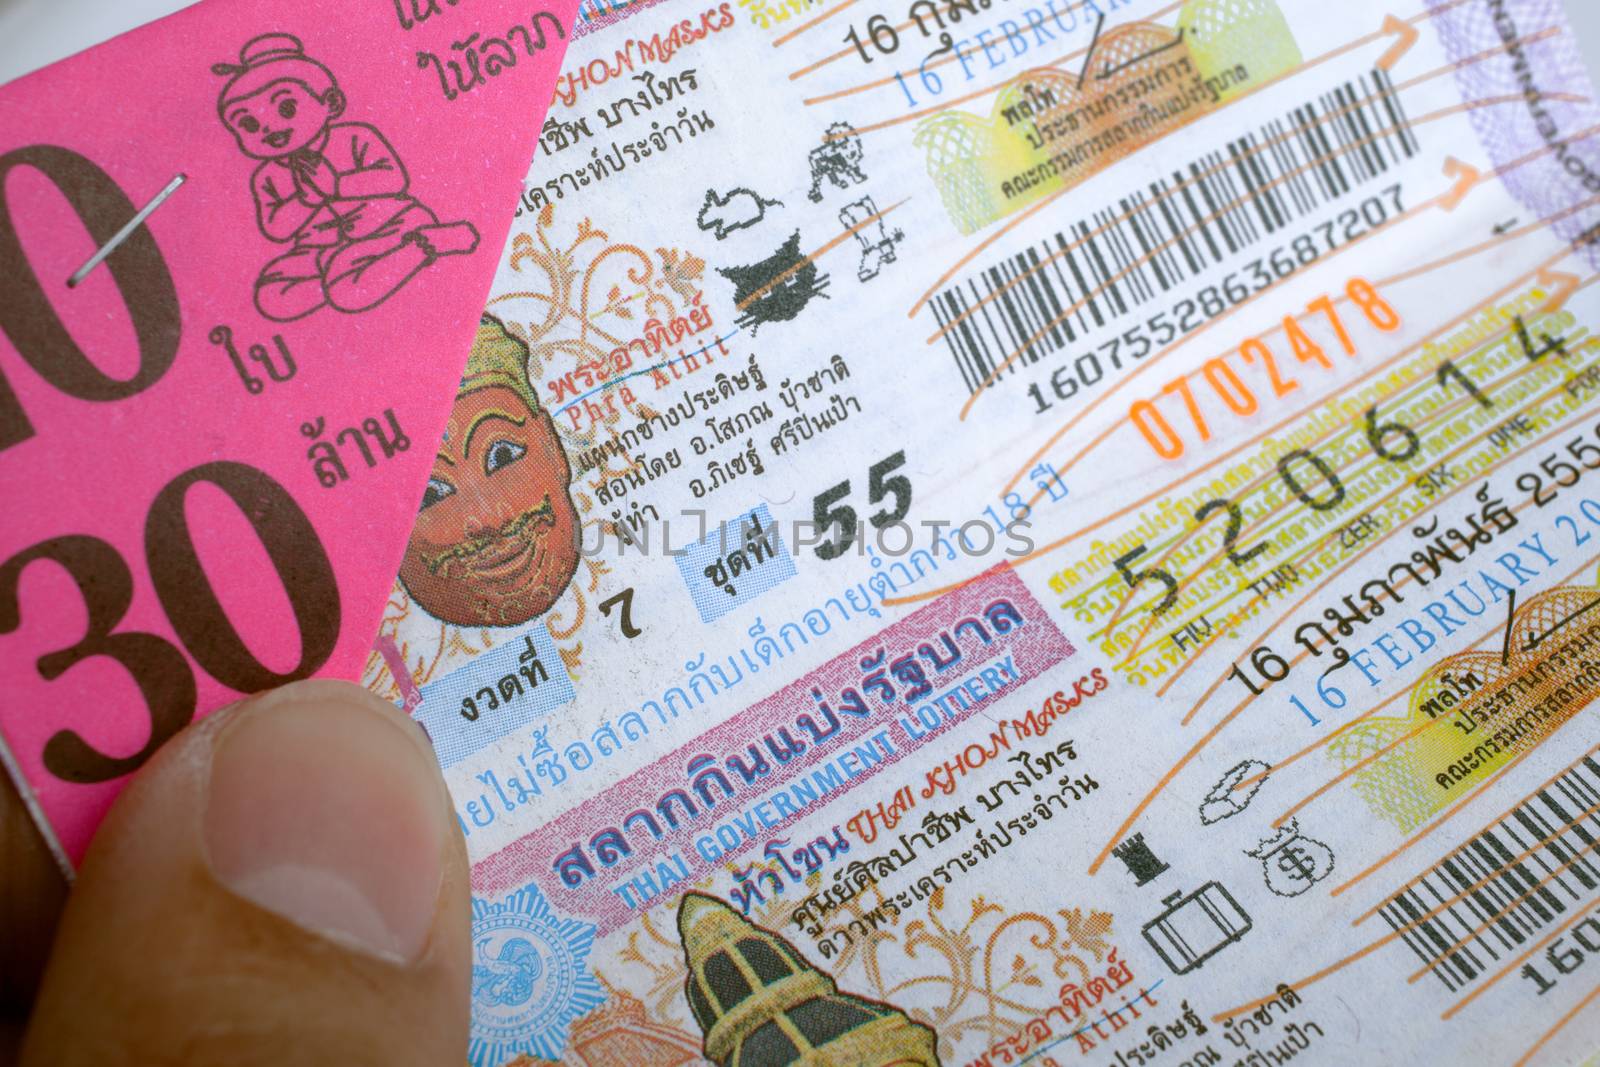 BANGKOK, THAILAND - FEBRUARY 10, 2015: Lottery ticket sold on corrugated plastic board, in the markets of Bangkok in Thailand, on February 10, 2015